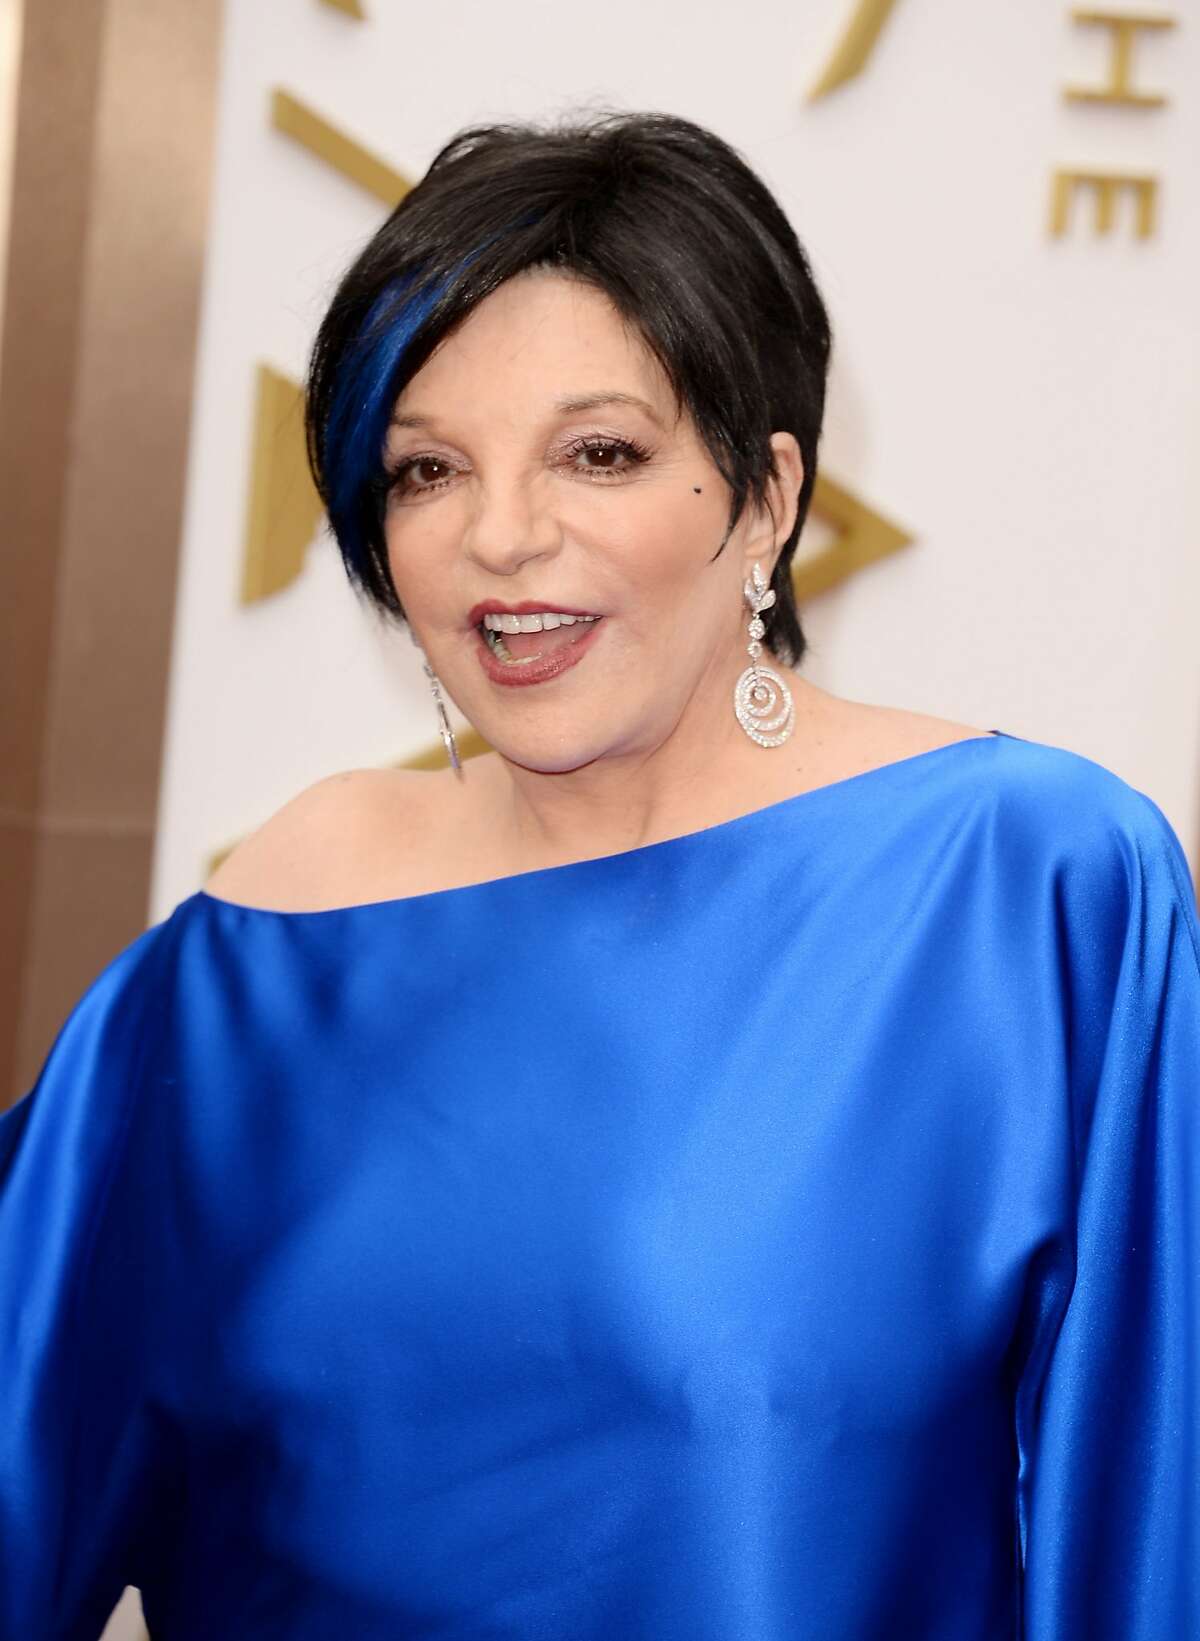 HOLLYWOOD, CA - MARCH 02: Actress Liza Minnelli attends the Oscars at Hollywood & Highland Center on March 2, 2014 in Hollywood, California. (Photo by Jason Merritt/Getty Images)